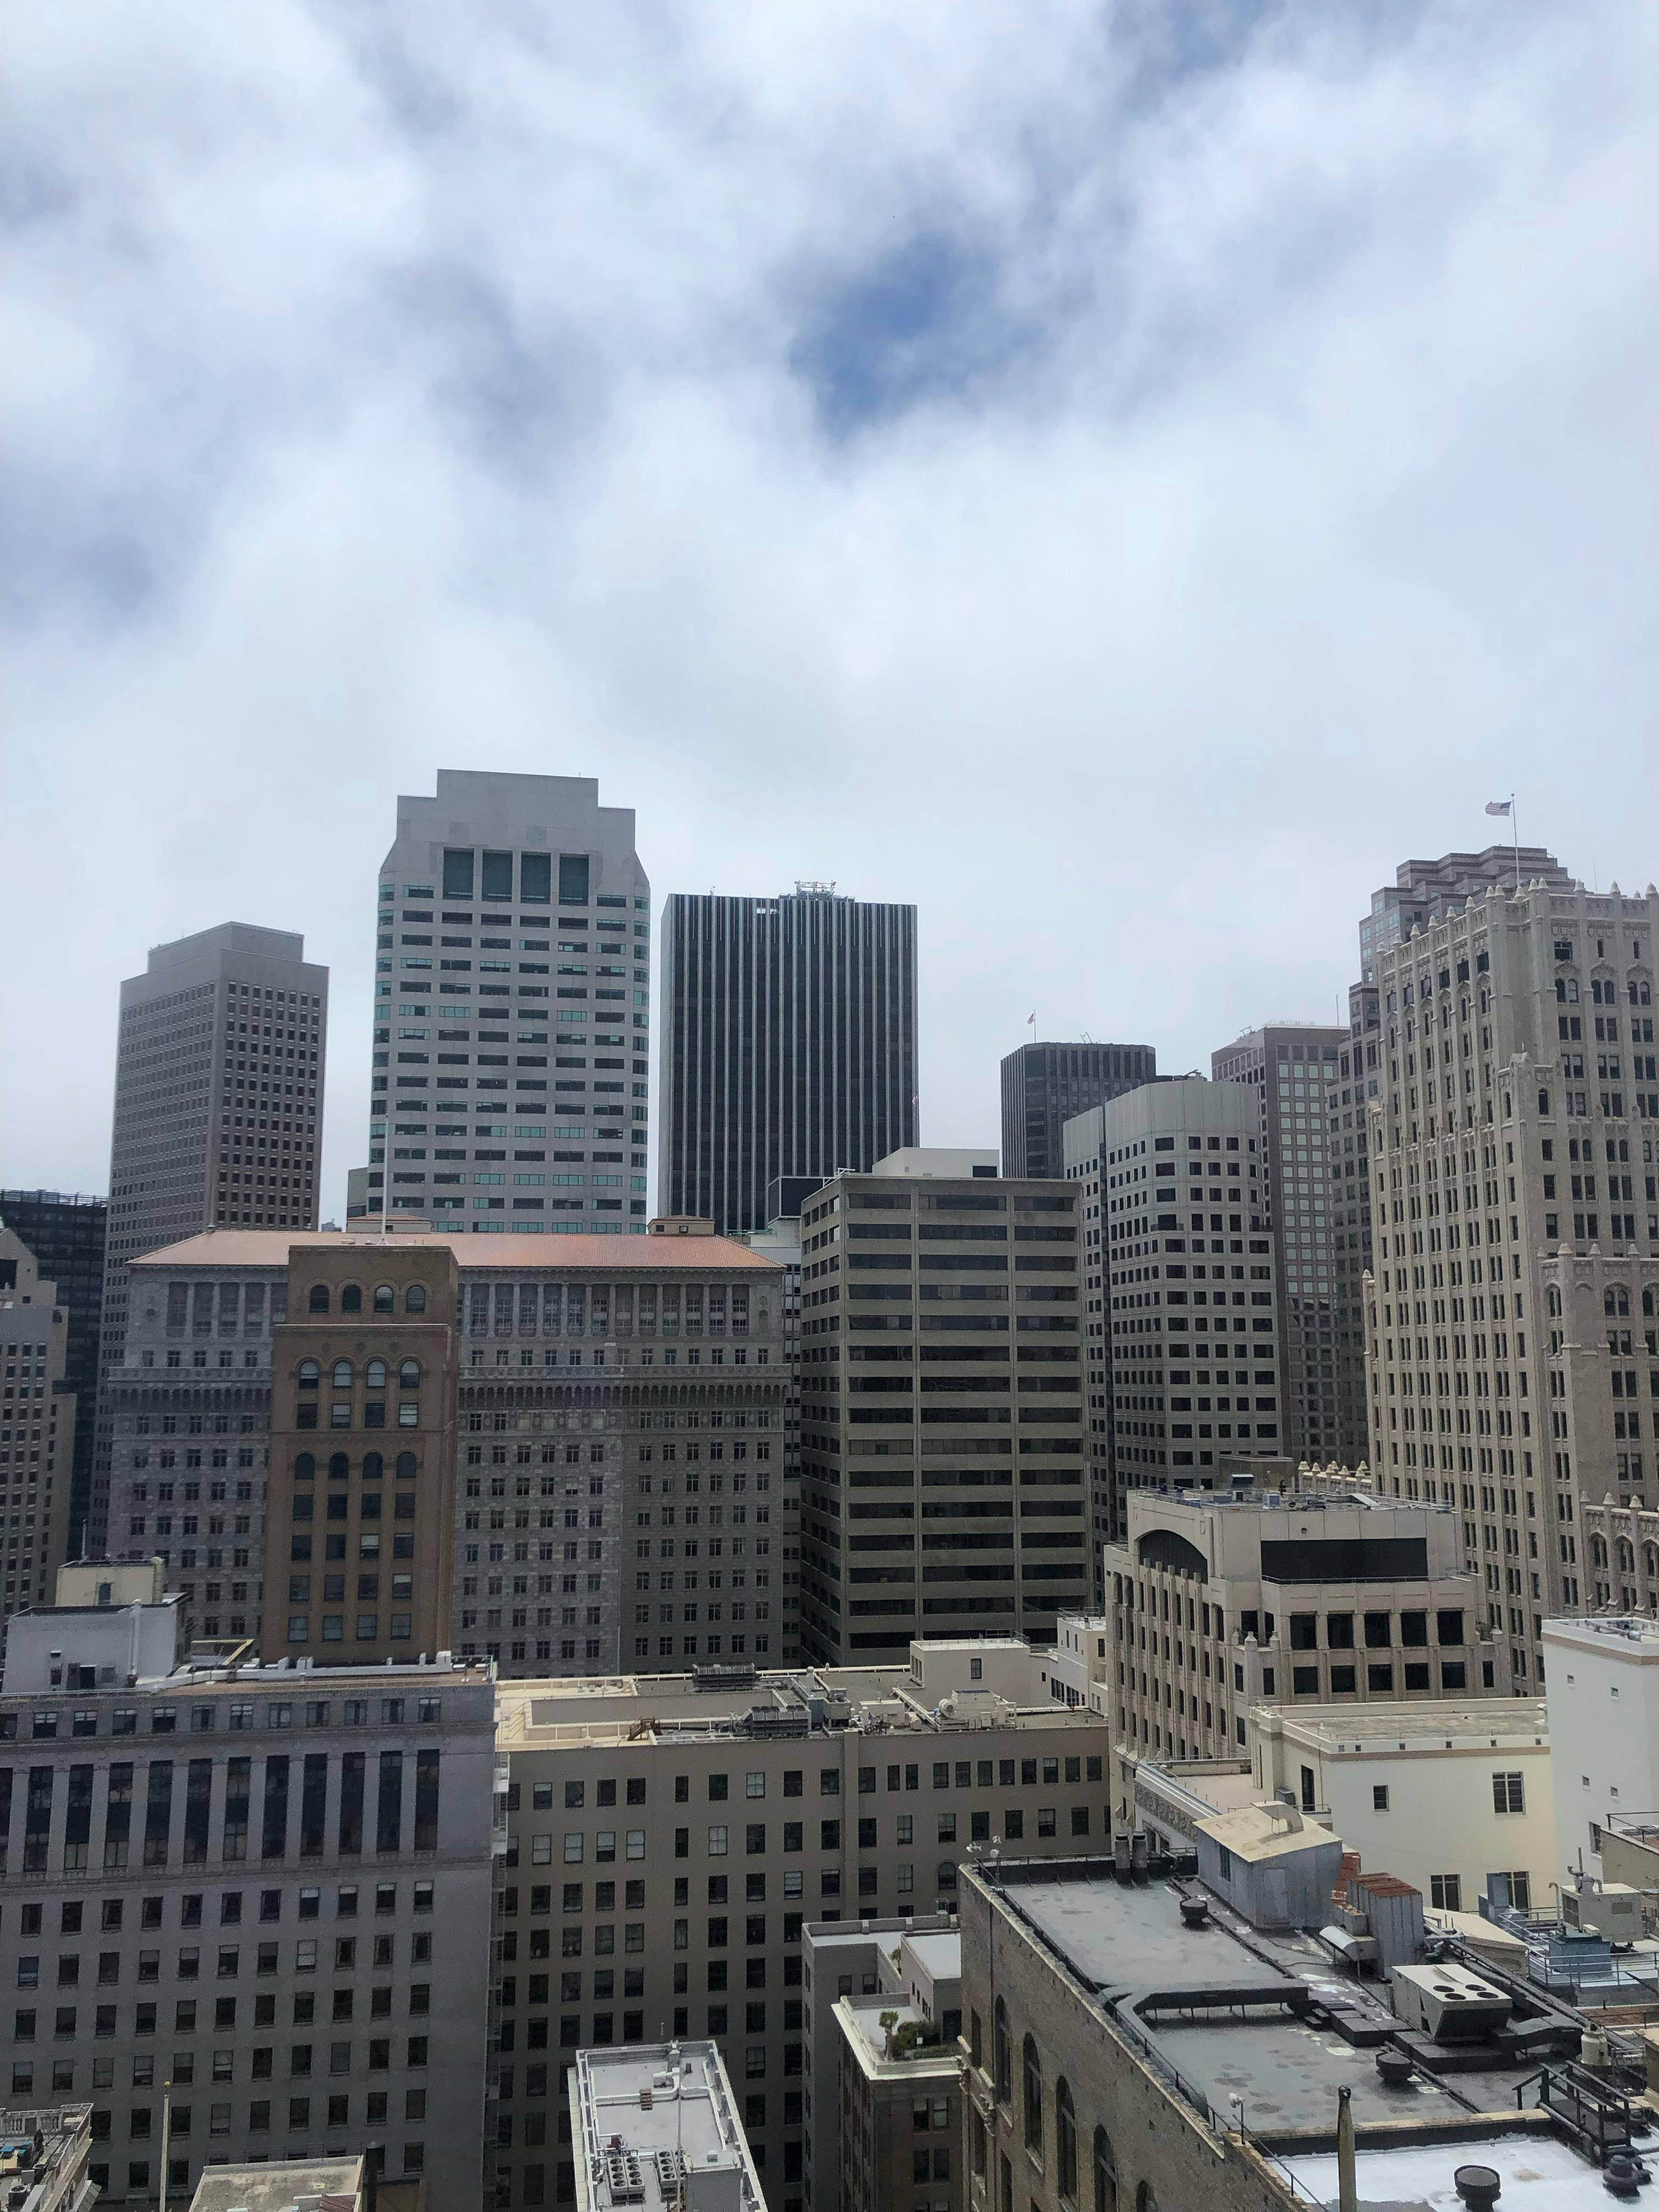 The view of San Francisco's Financial District from my desk.